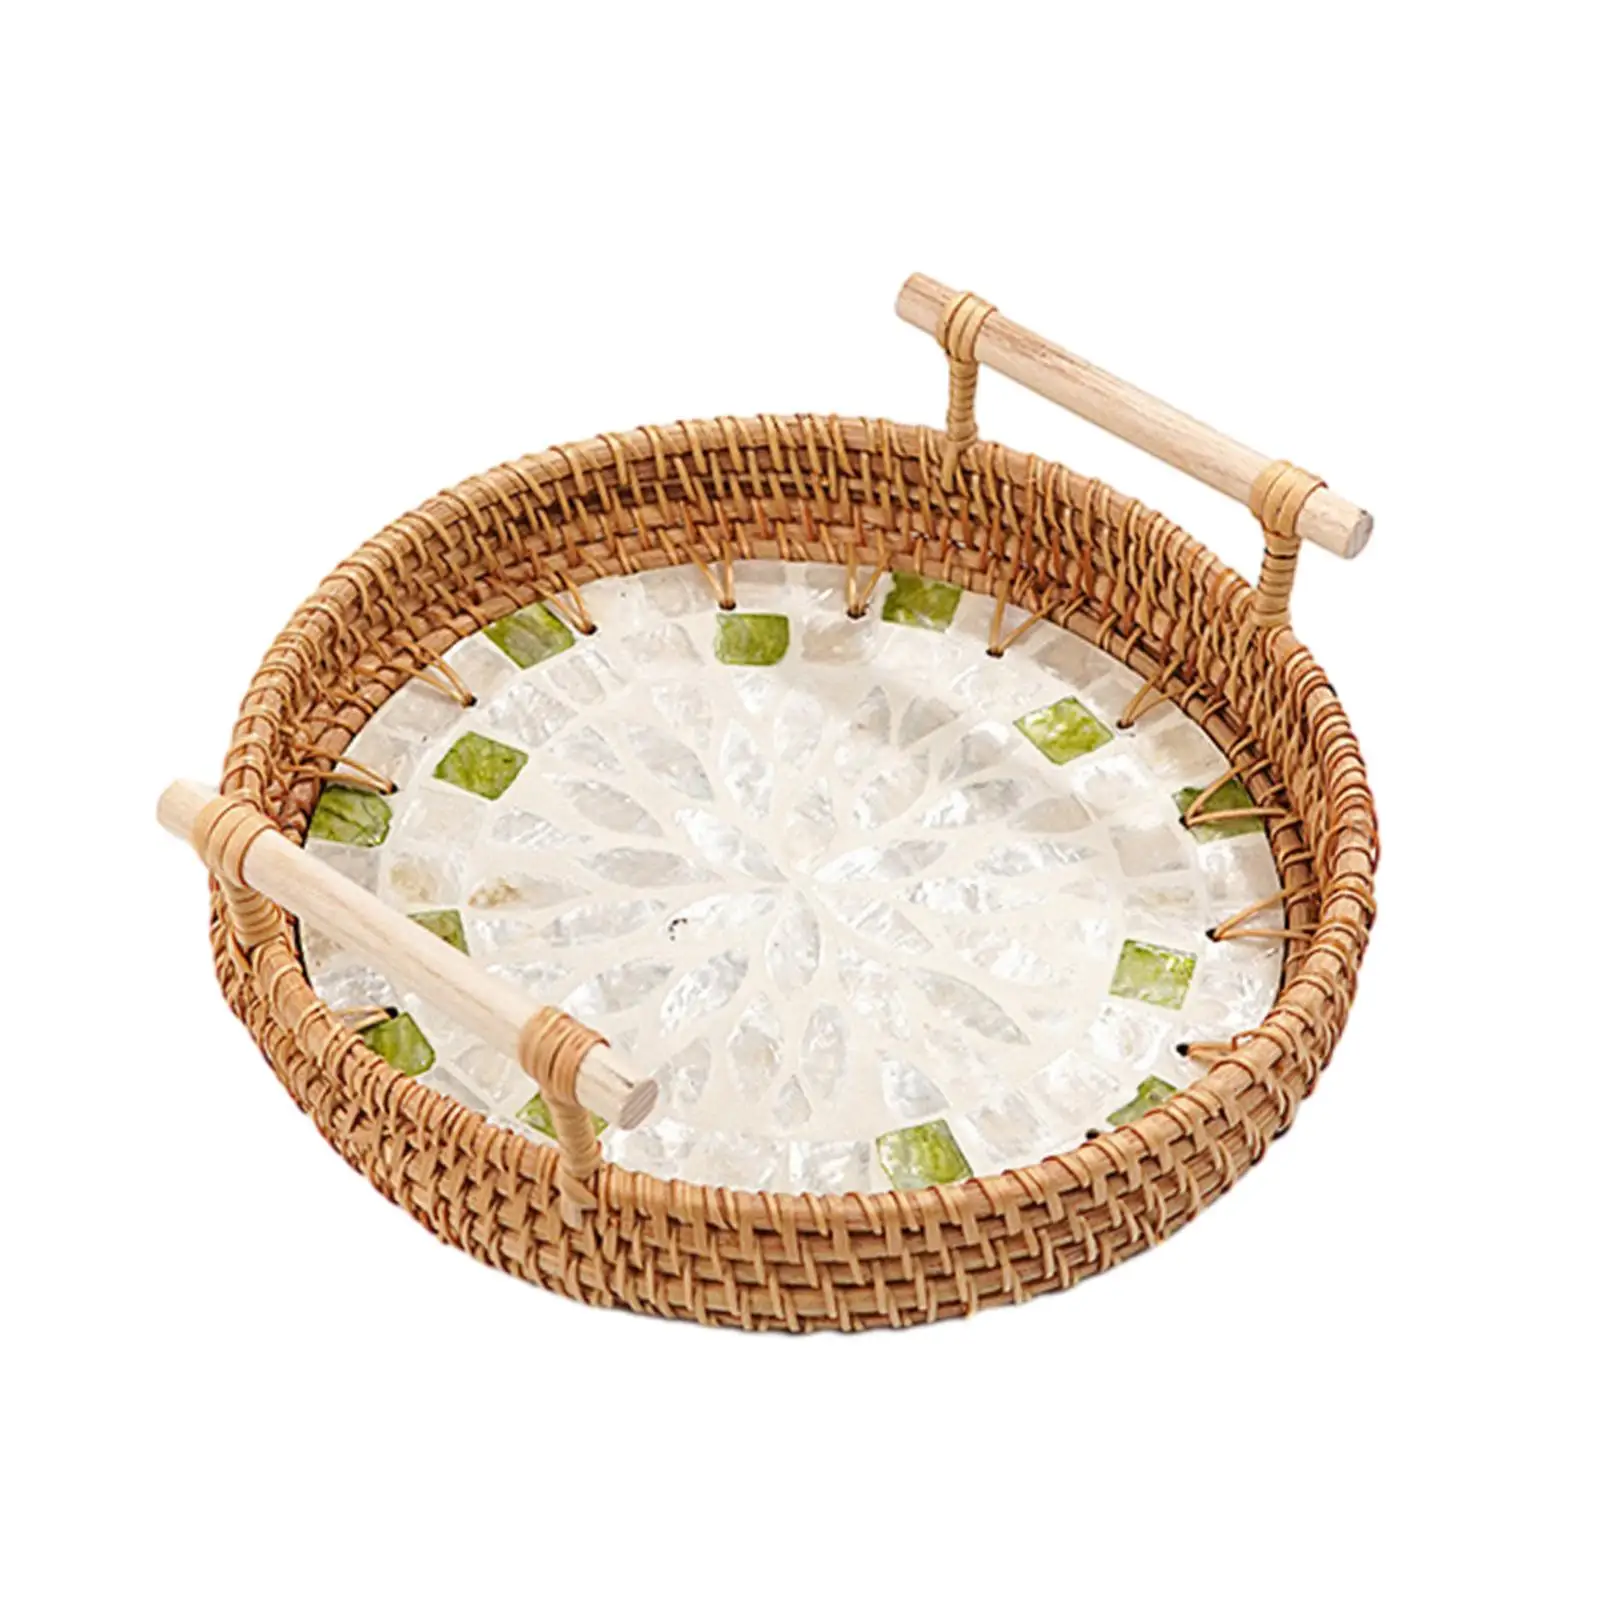 Woven Rattan Serving Tray Bread Nordic Multifunctional Cake Snacks Tray for Kitchen Coffee Table Afternoon Tea Party Living Room